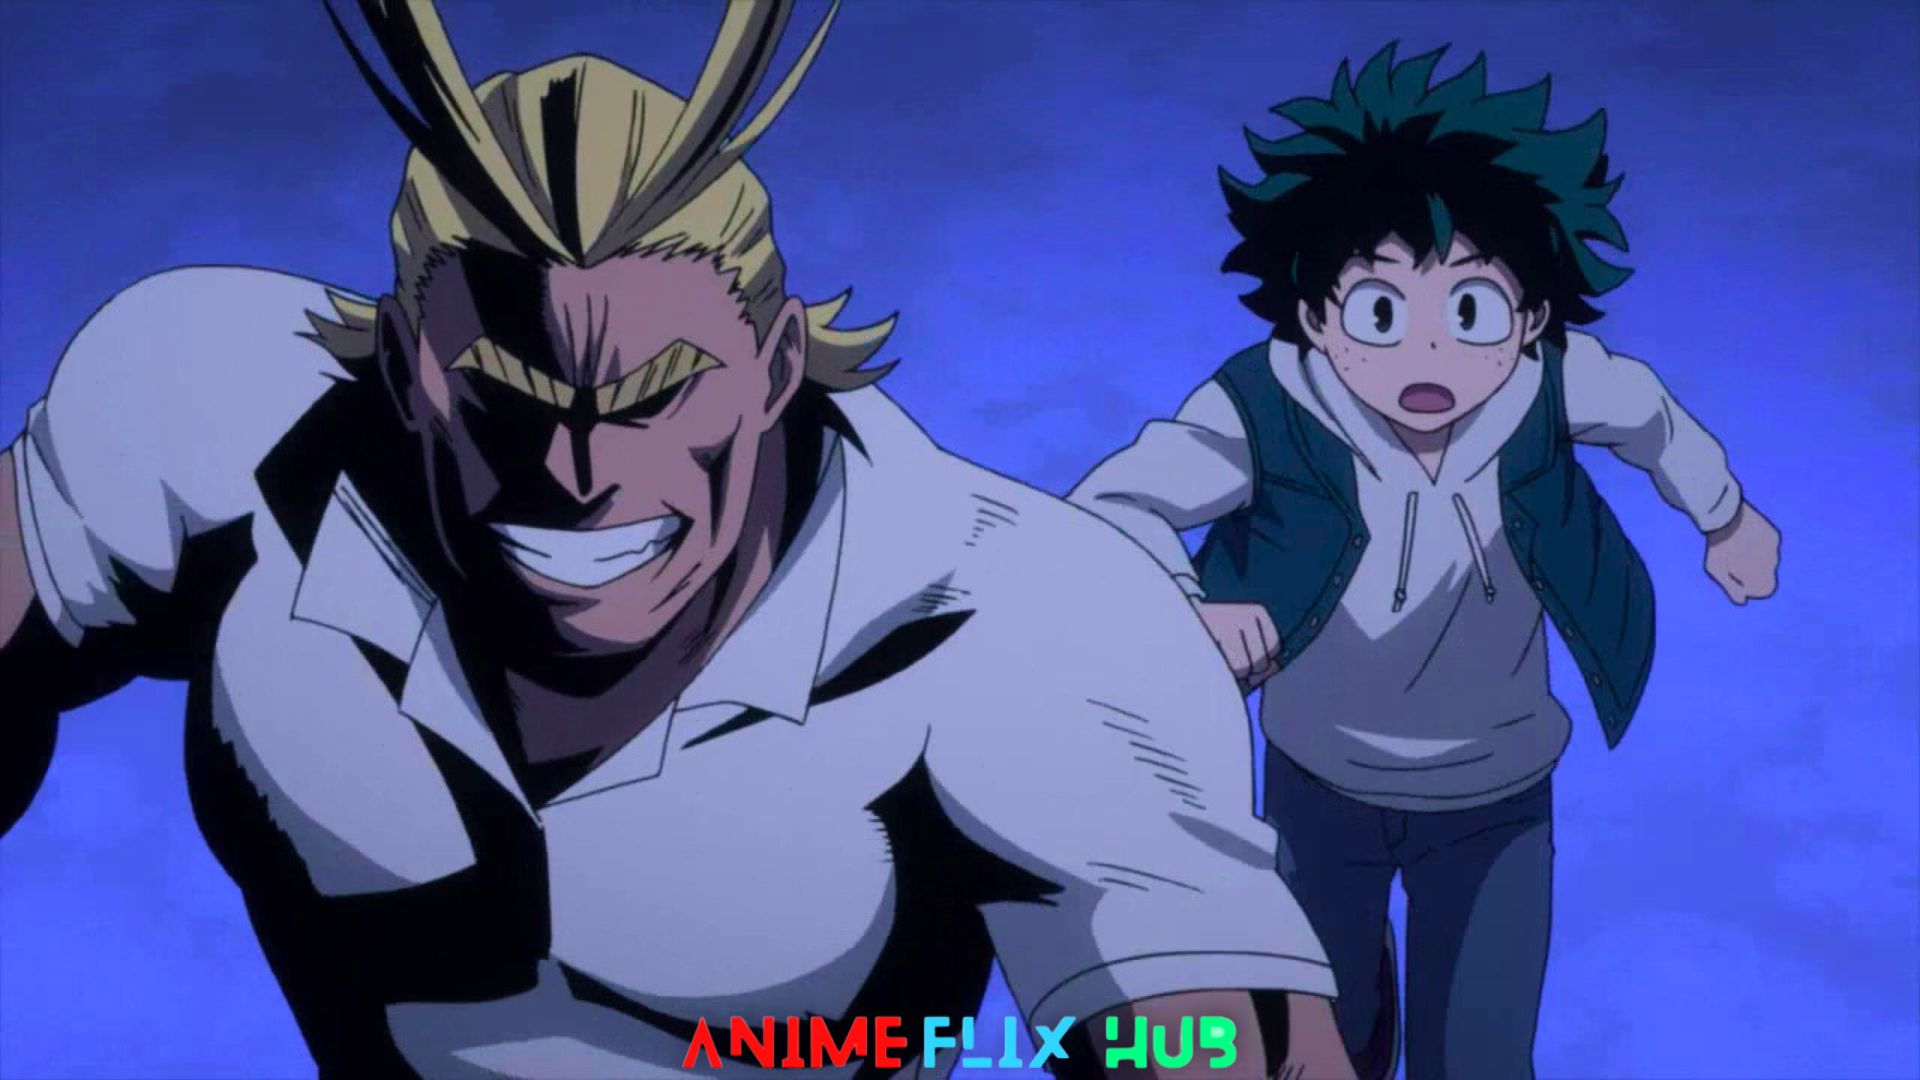 When All Might Wanted To Stop Deku's Match